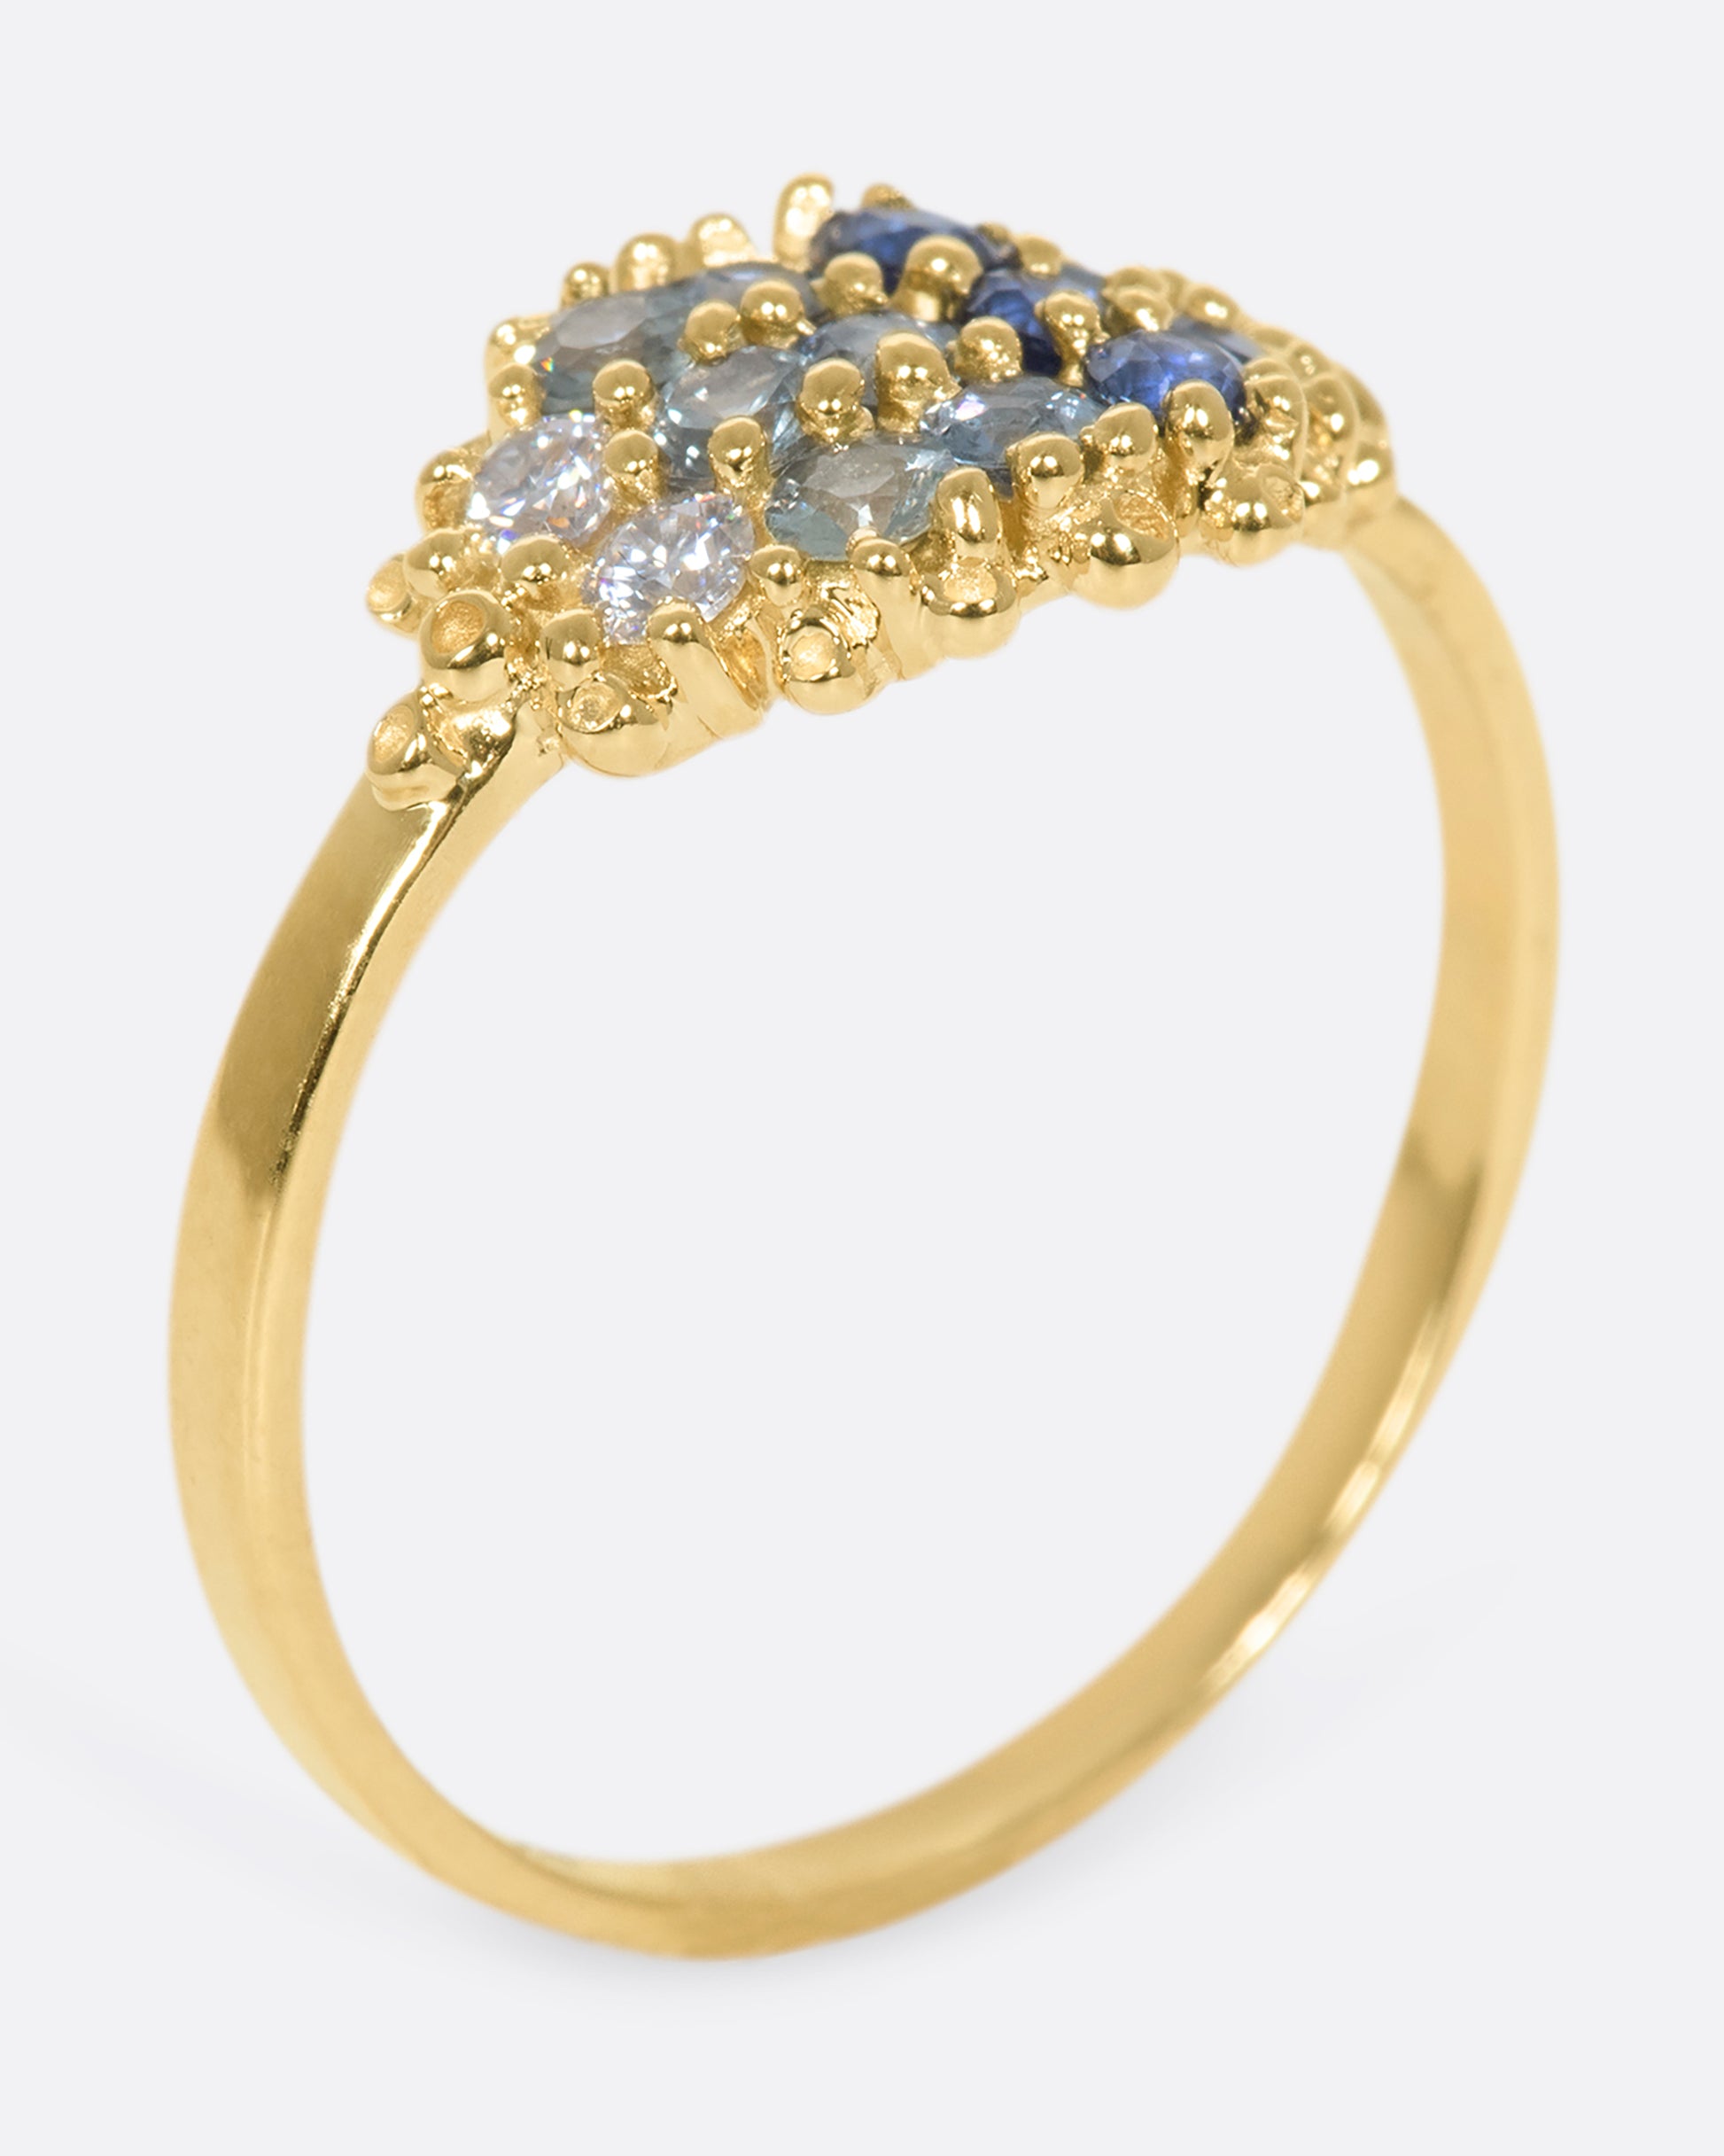 A view of a yellow gold ring with 12 sapphires in a range of blue shades standing upright on its band.